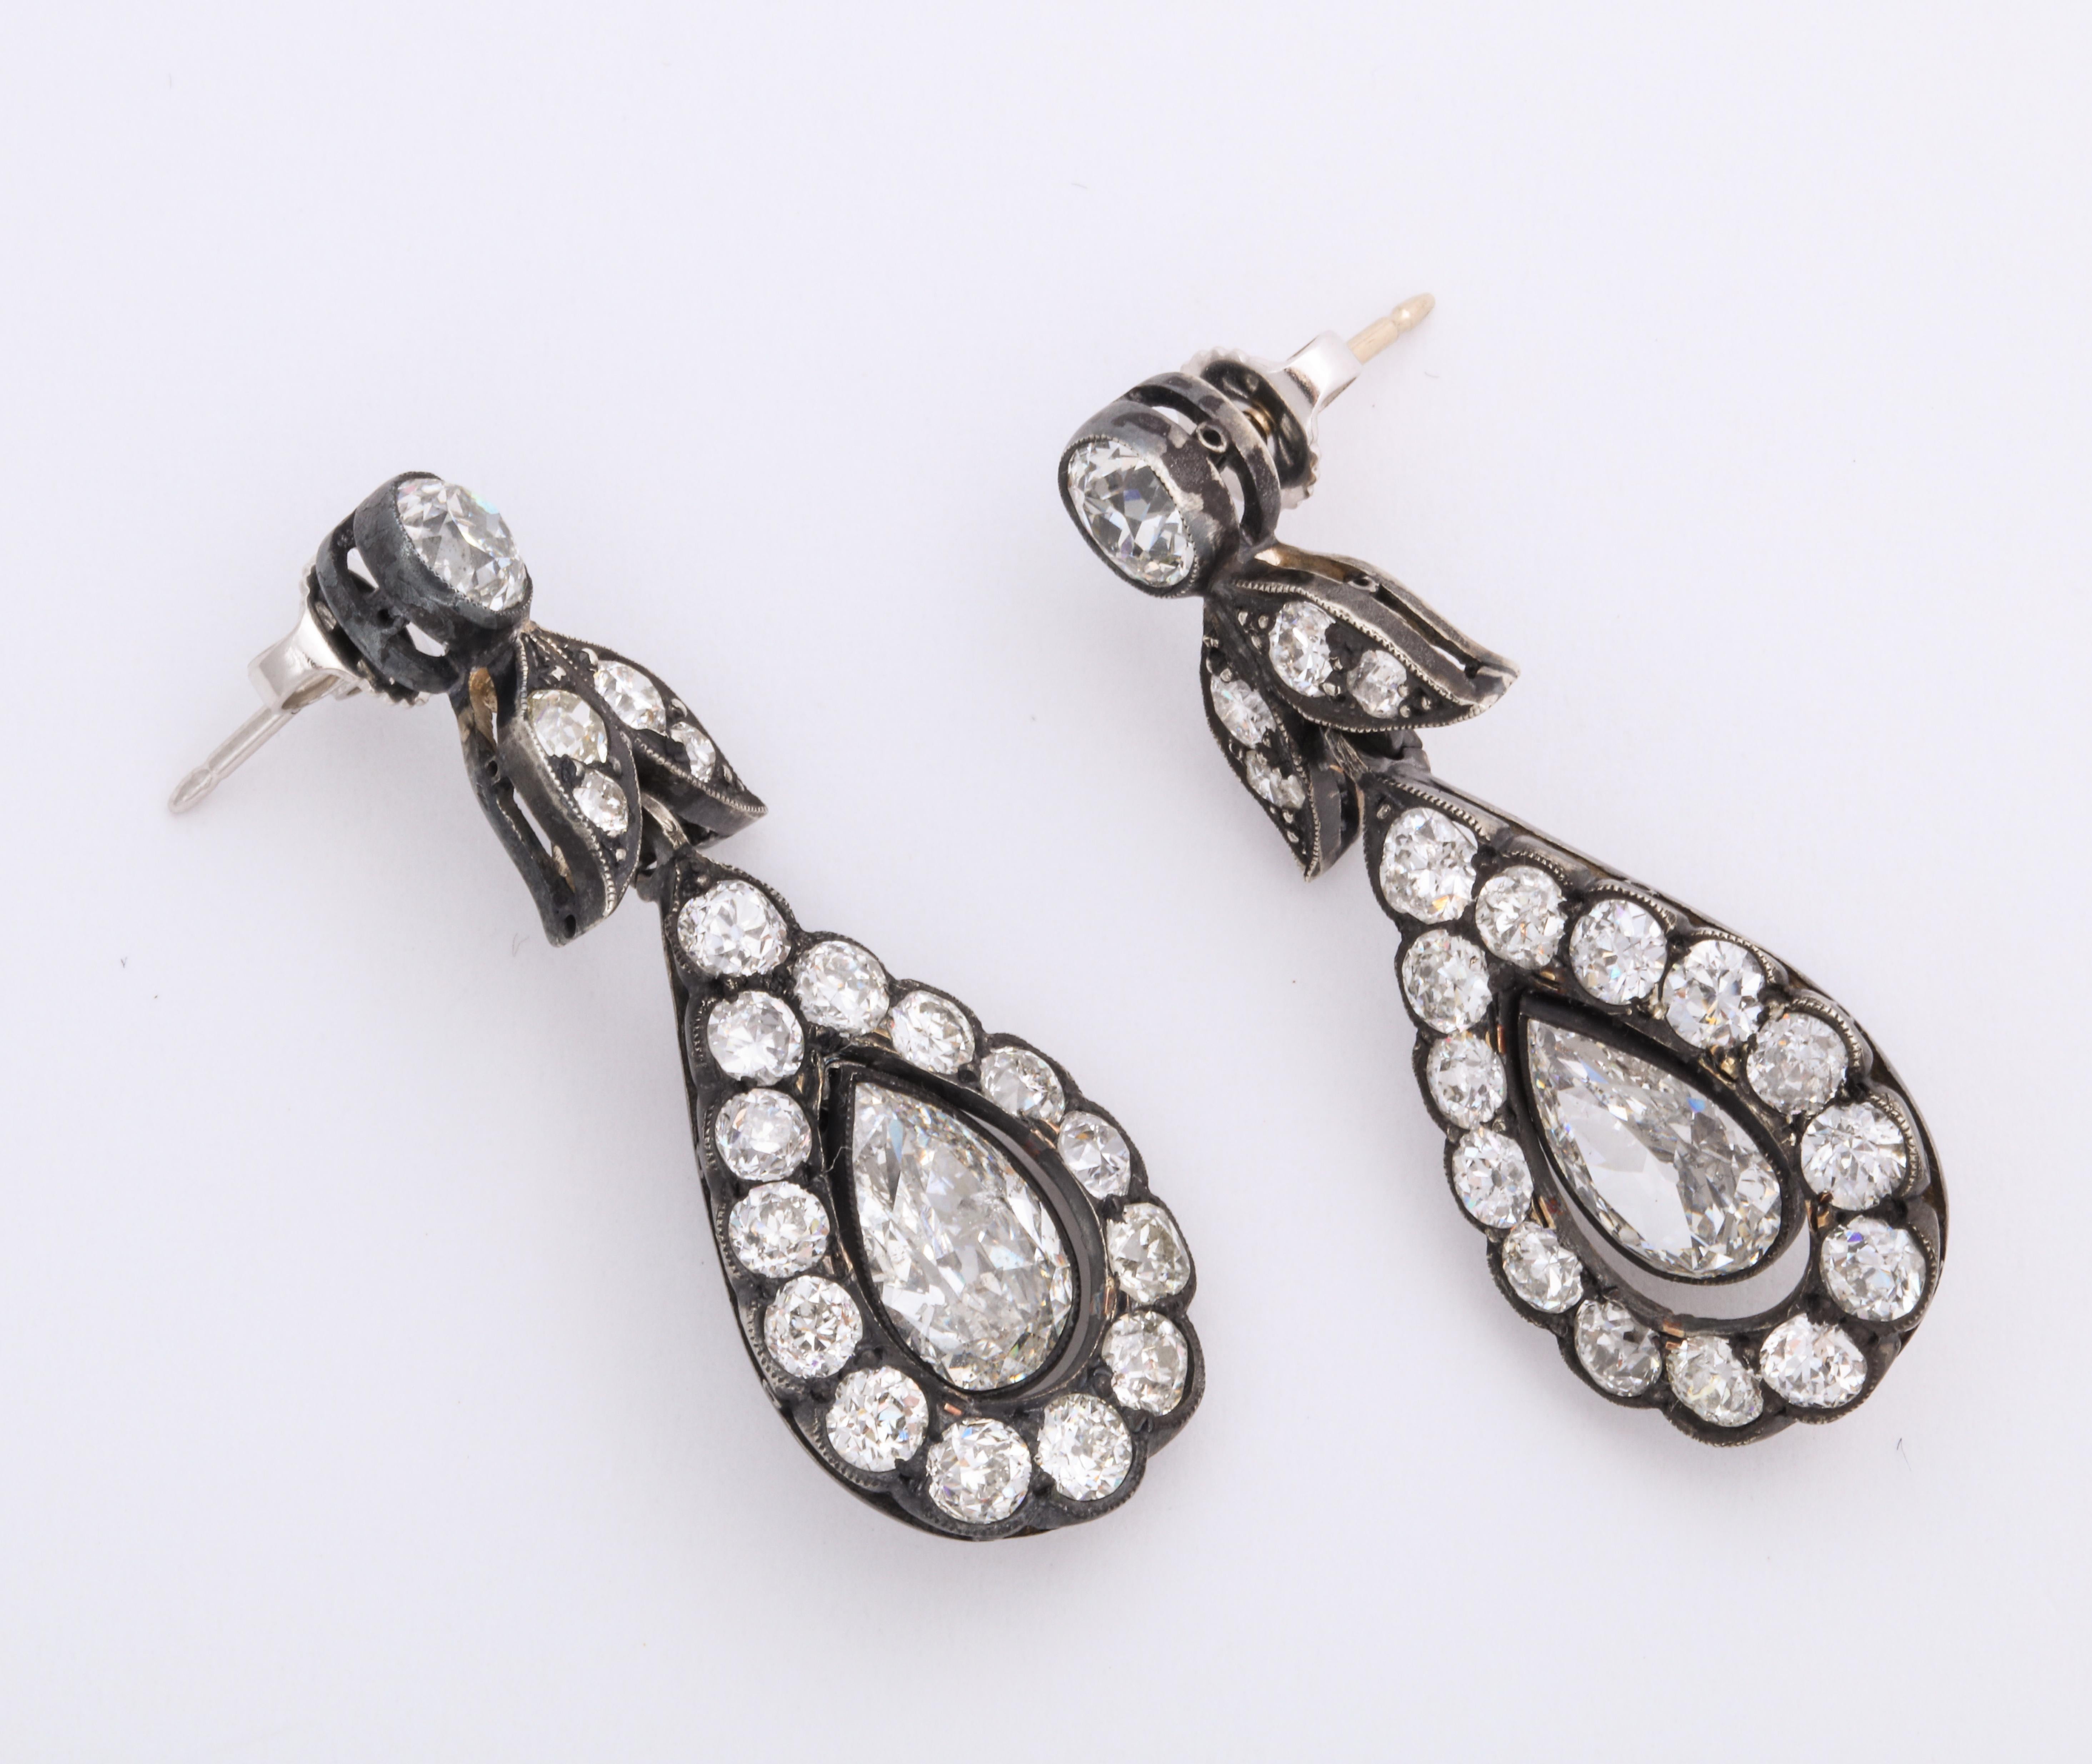 Classic Georgian diamond earrings are high contrast drama! These diamond drop earrings are fashioned in silver-topped 18K gold and have over 6 carats of bright white old mine cut diamonds in a typically symmetrical pendant design for the ear.  Not